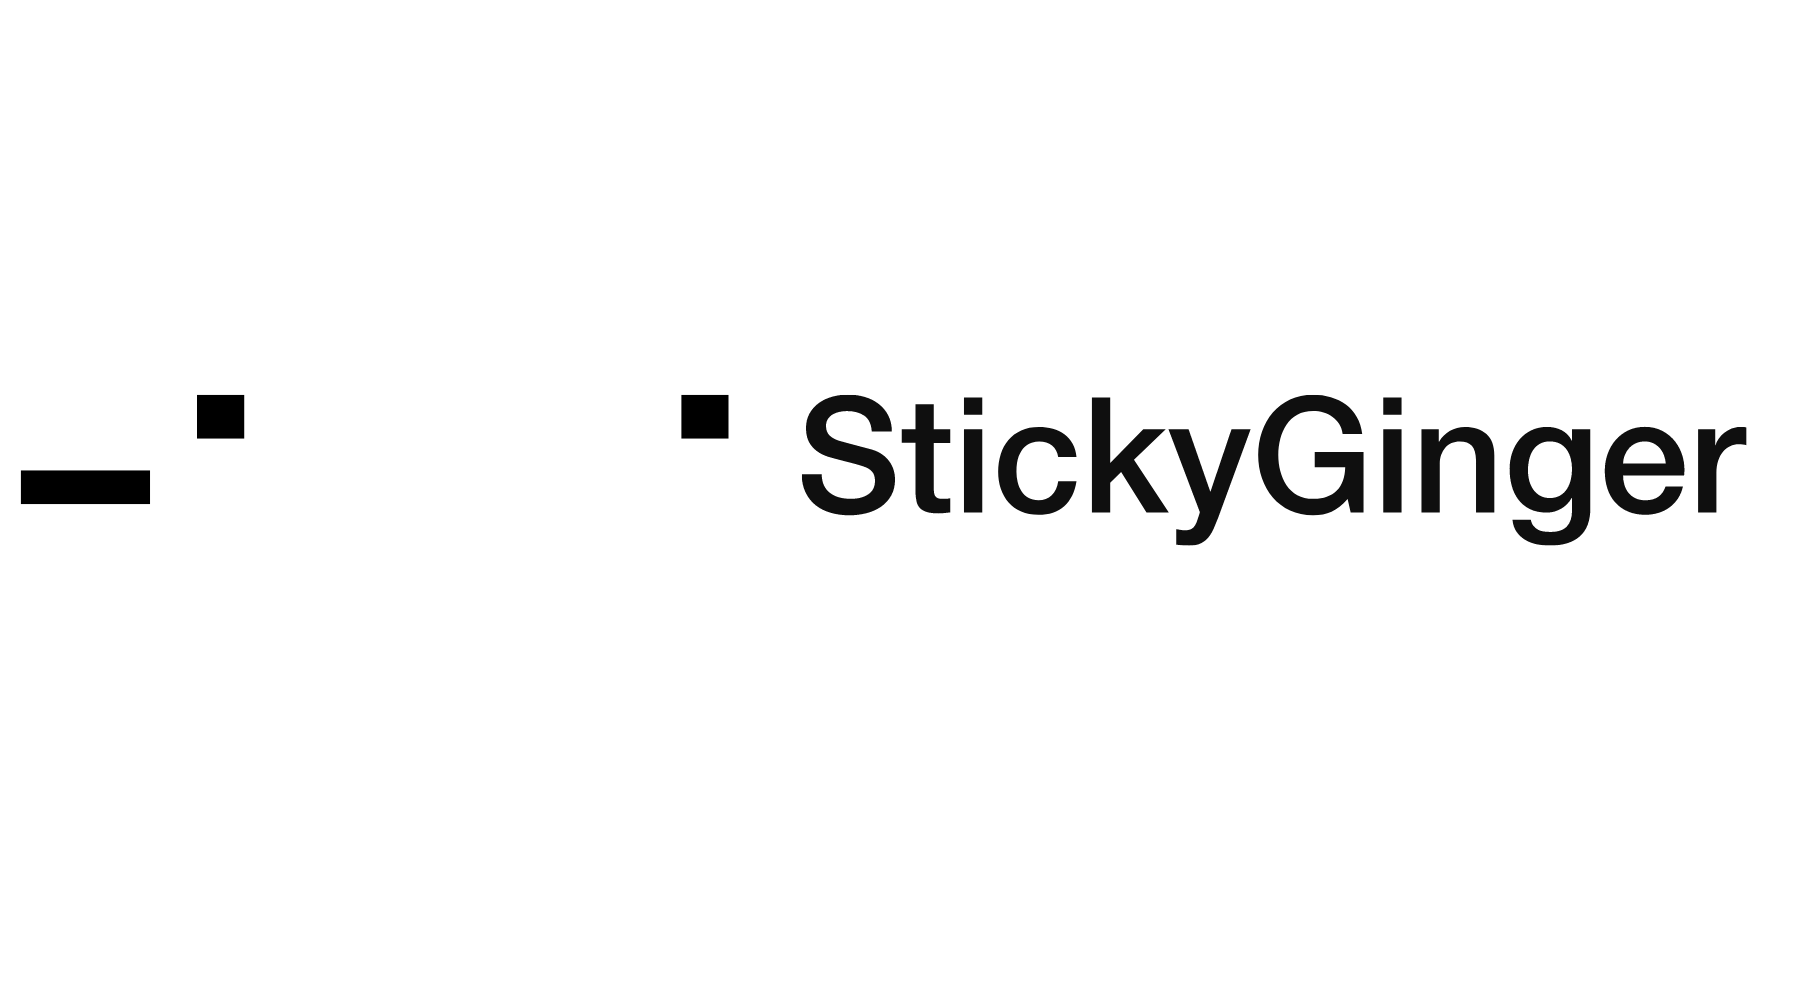 StickyGinger Expands Offering and Reveals New Identity